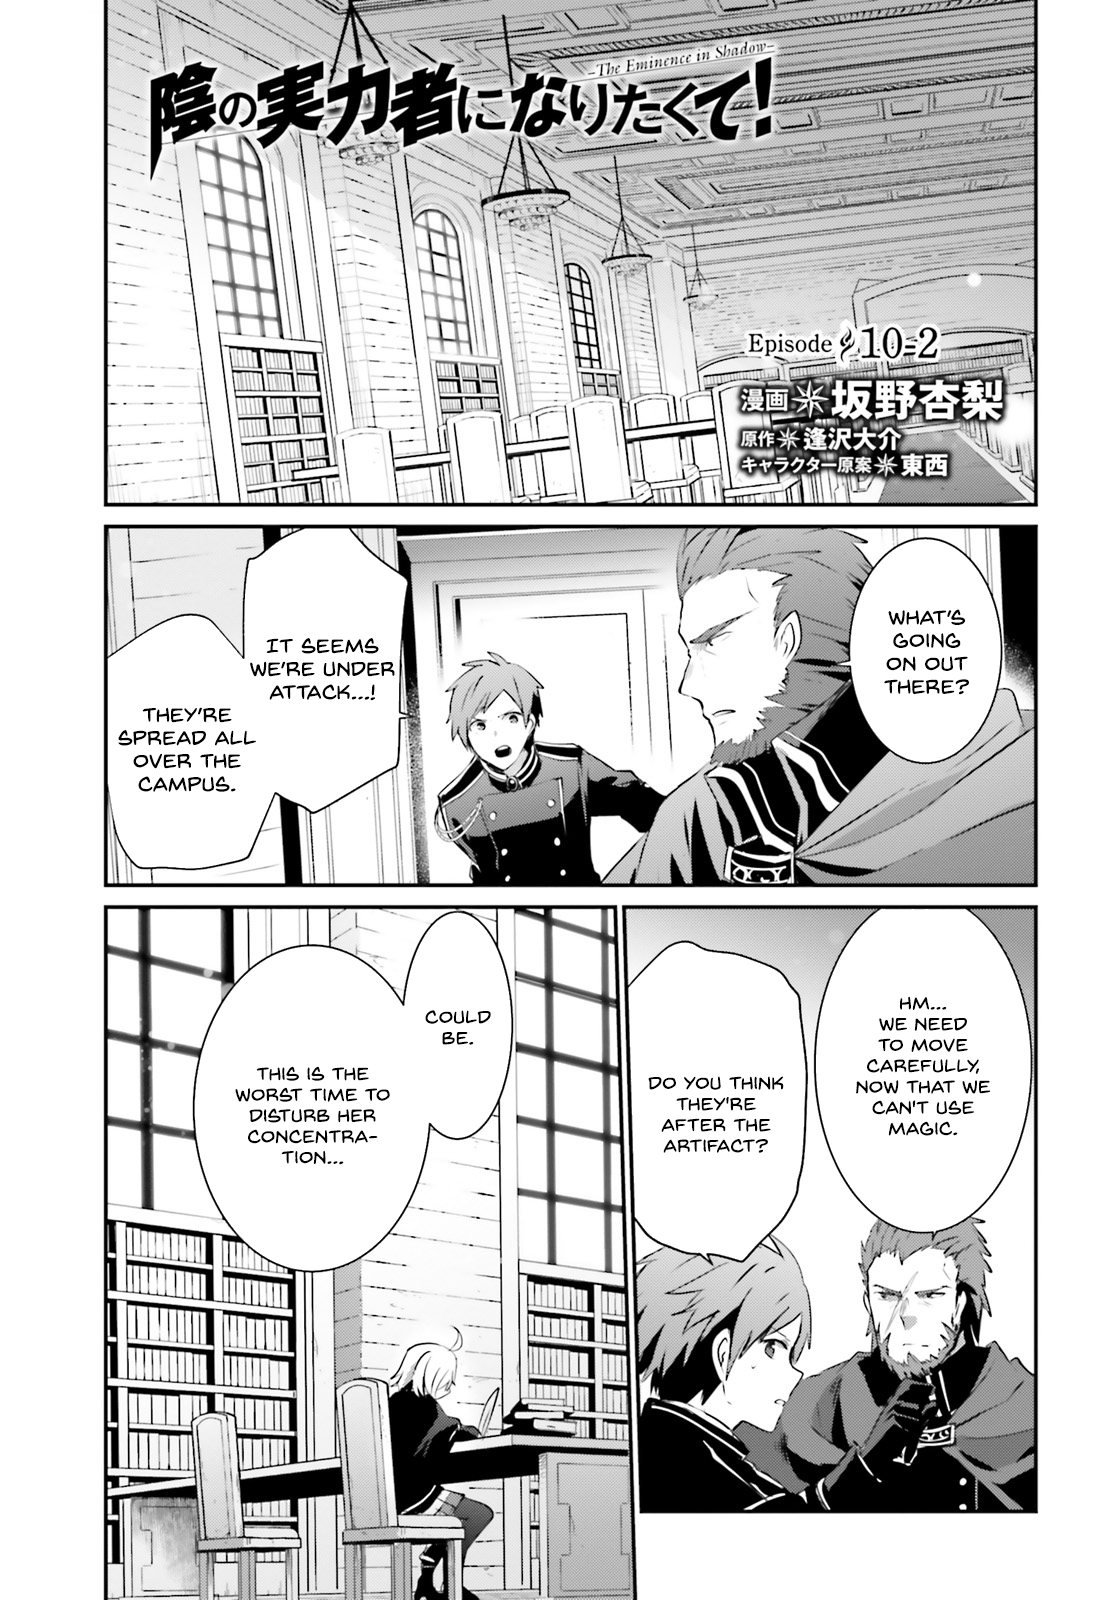 The Eminence In Shadow - Page 2